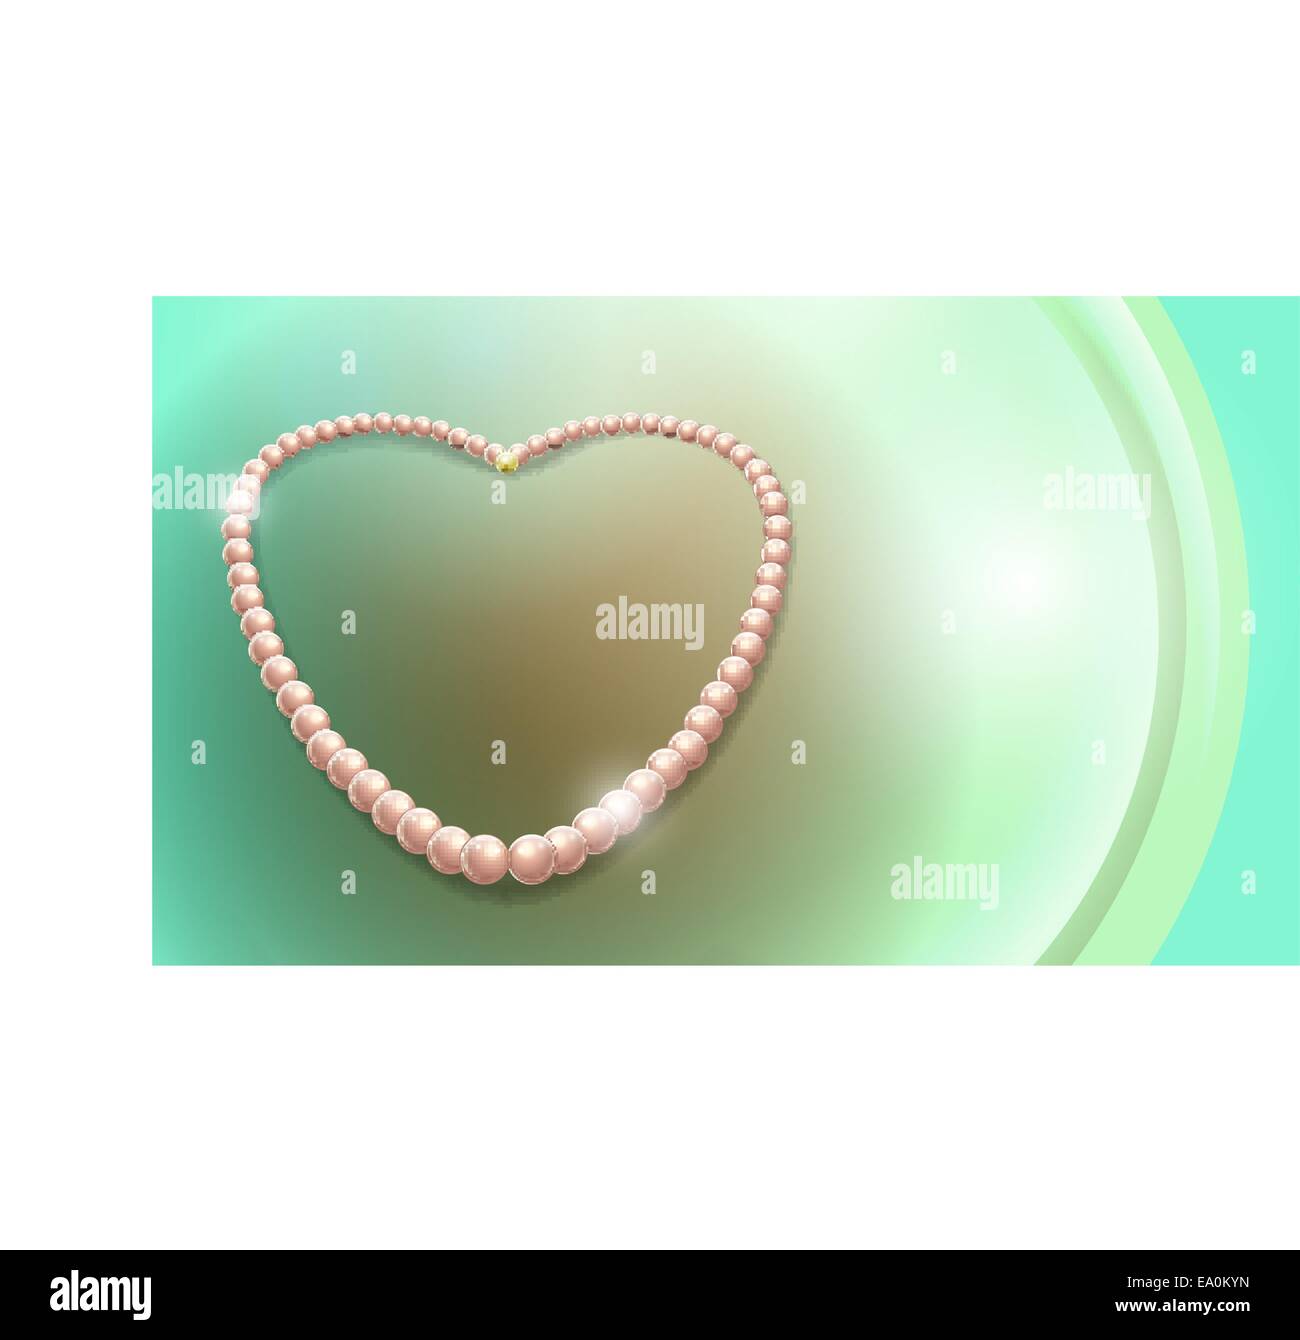 vector shiny pearls necklace, eps10 file, gradient mesh and transparency used Stock Vector